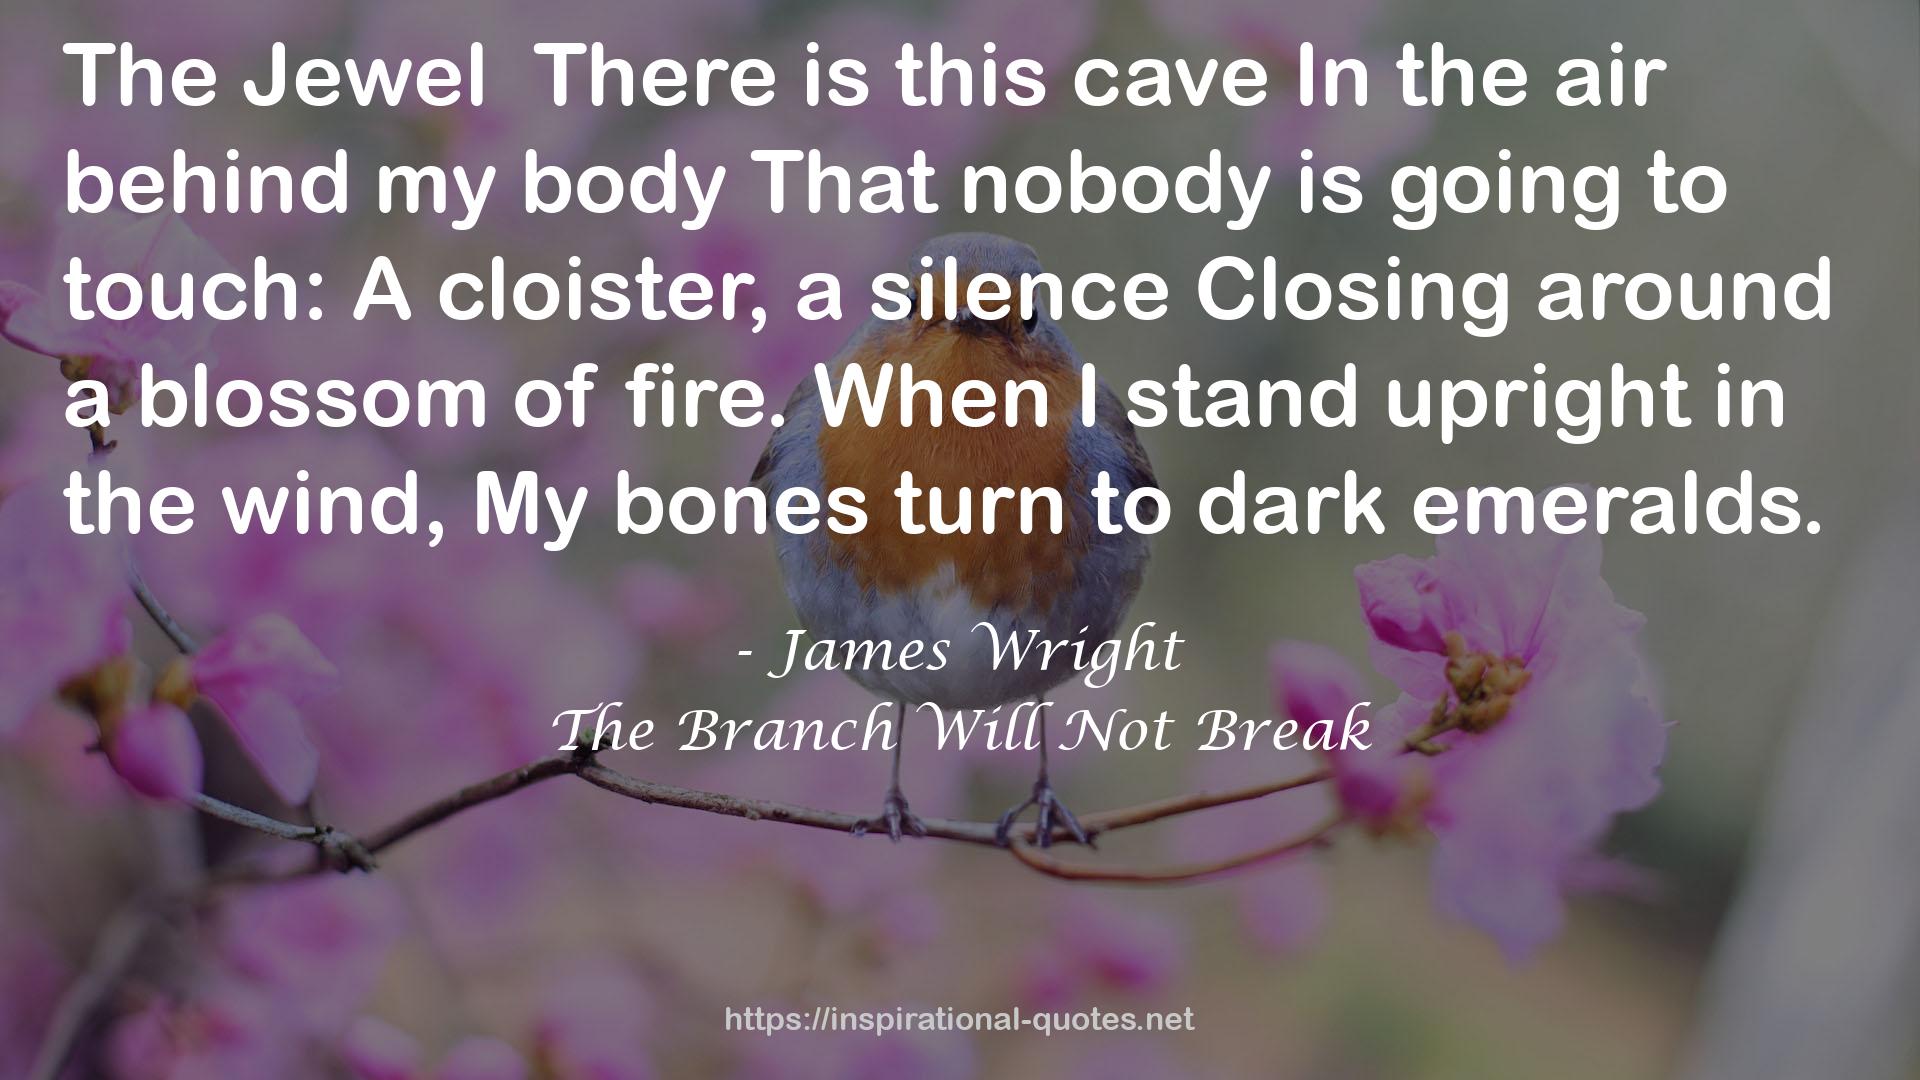 James Wright QUOTES